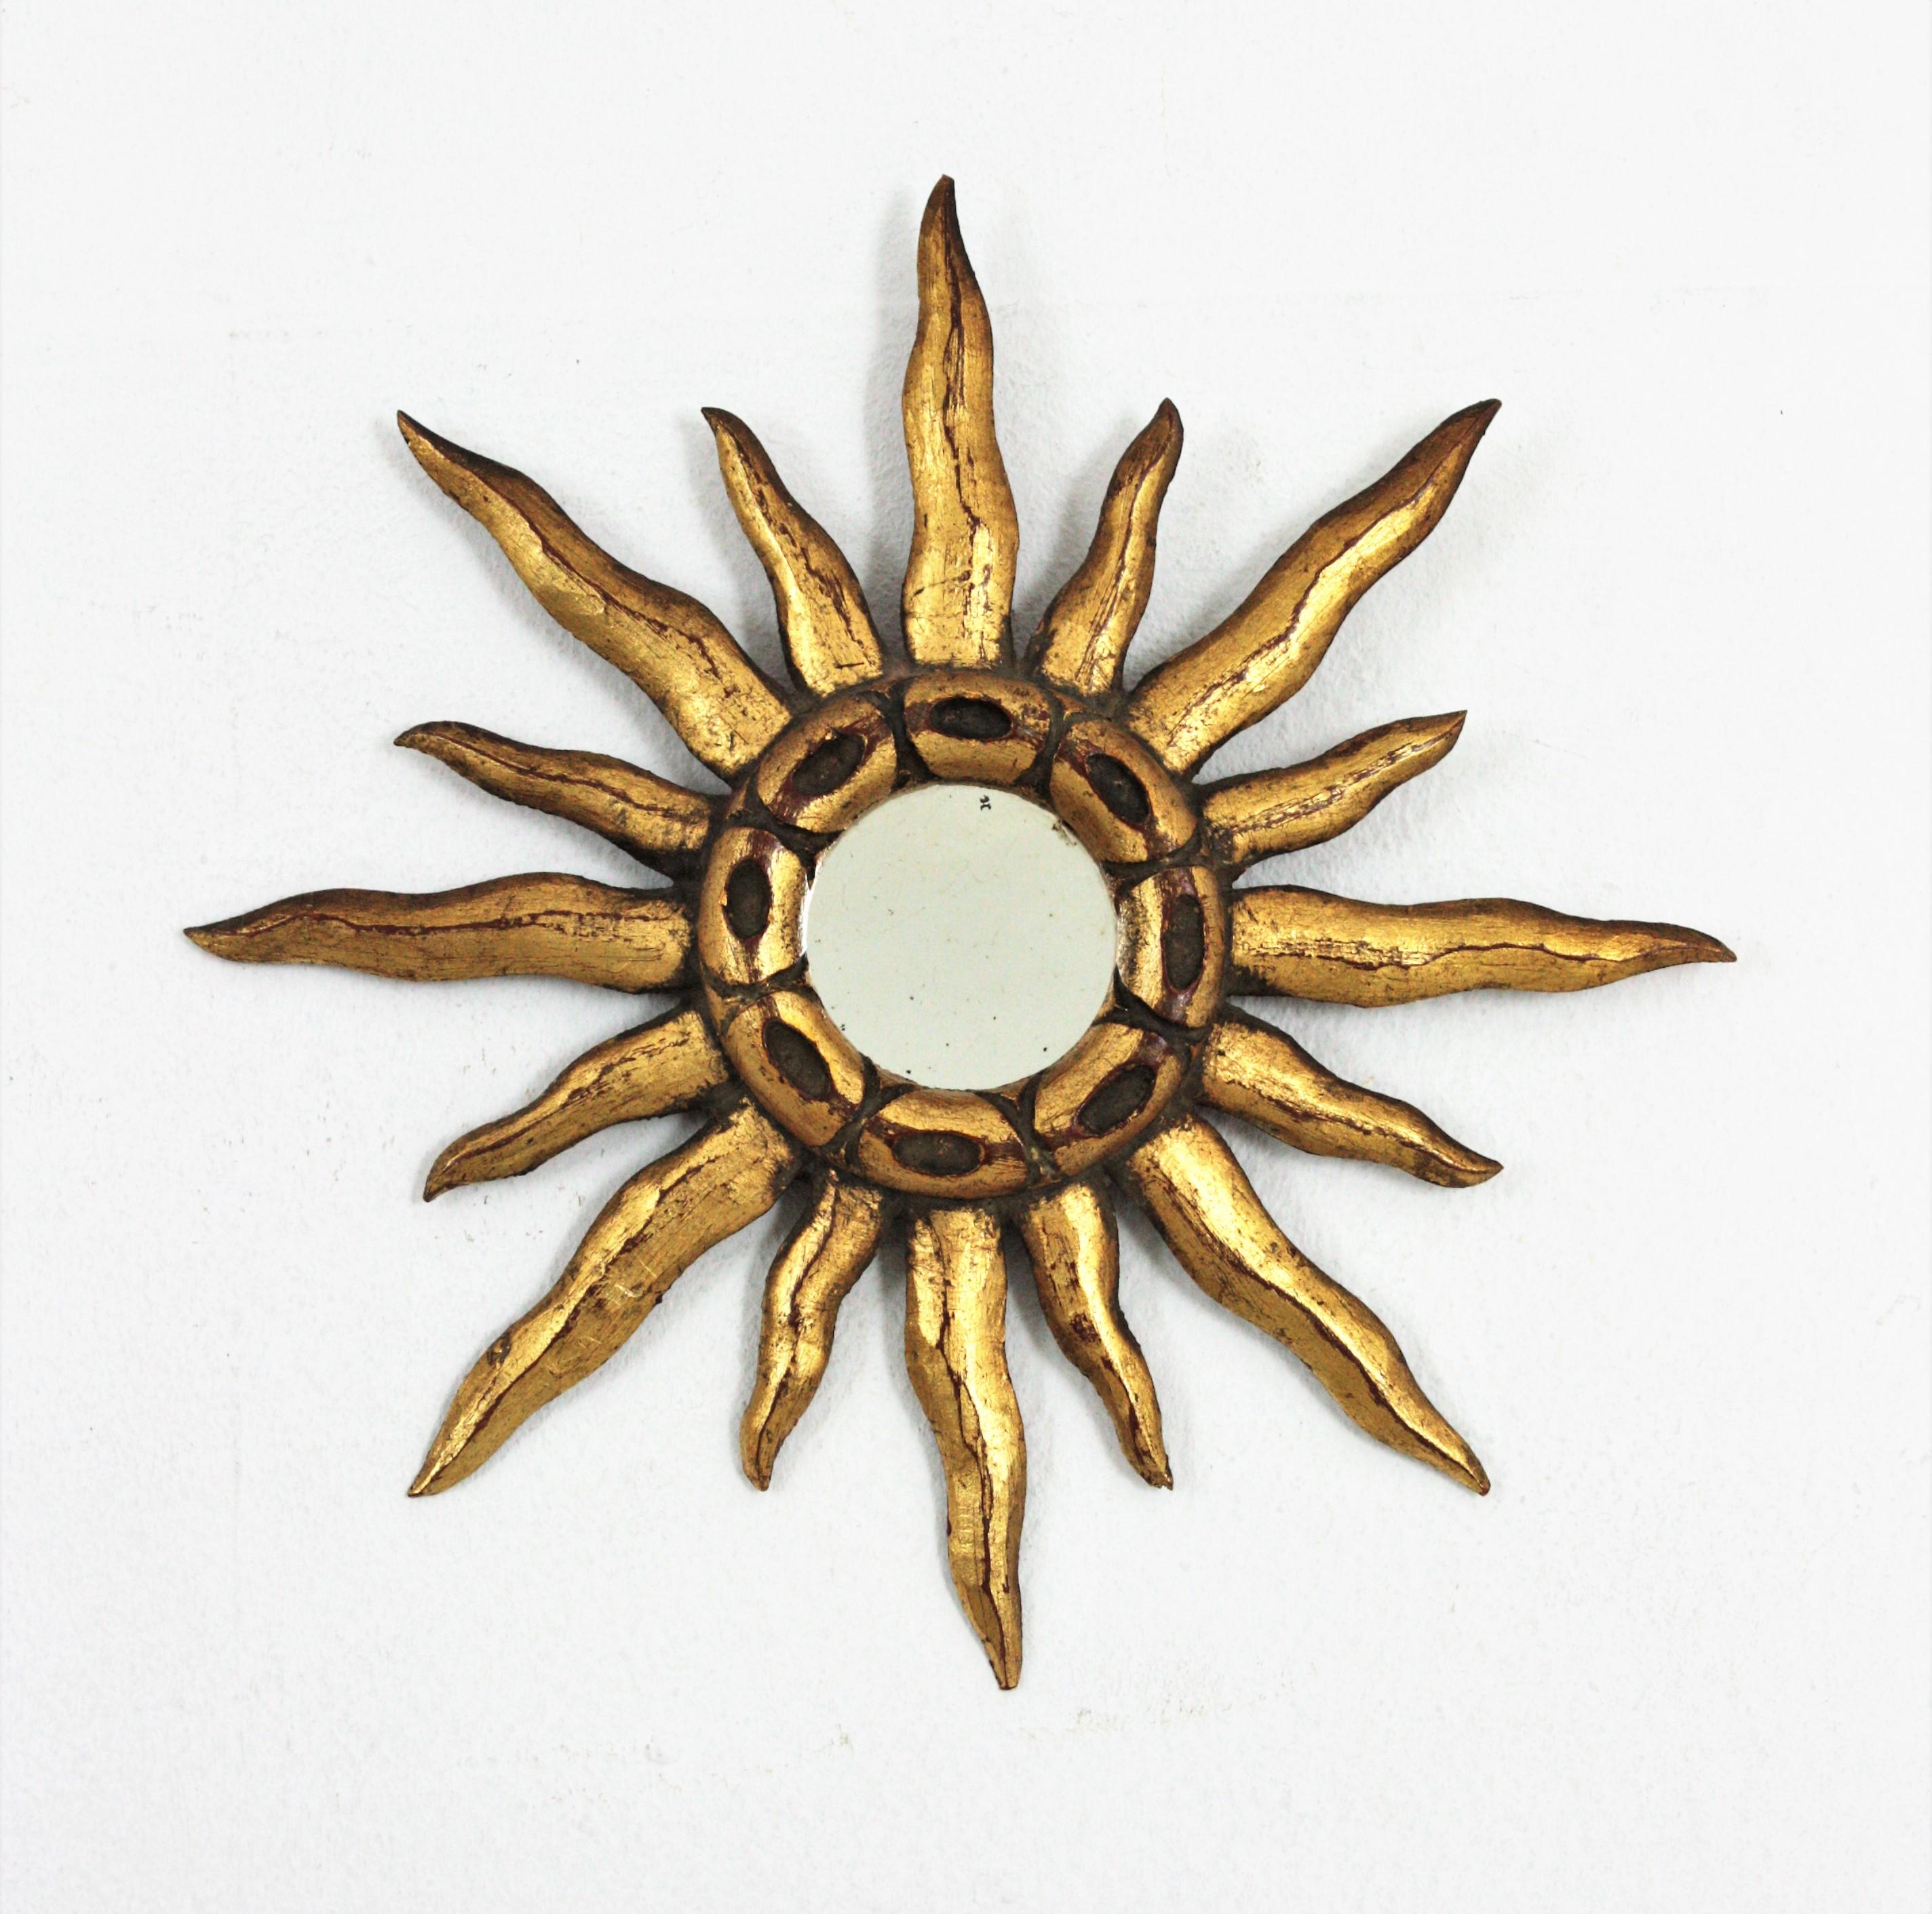 Unmatching pair of small scale sunburst mirrors in carved giltwood, Spain, 1940-1950s.
Eye-catching pair of mini sized sunburst mirrors in baroque style. Each one has a different design with carving details. One has a carved pattern at the central